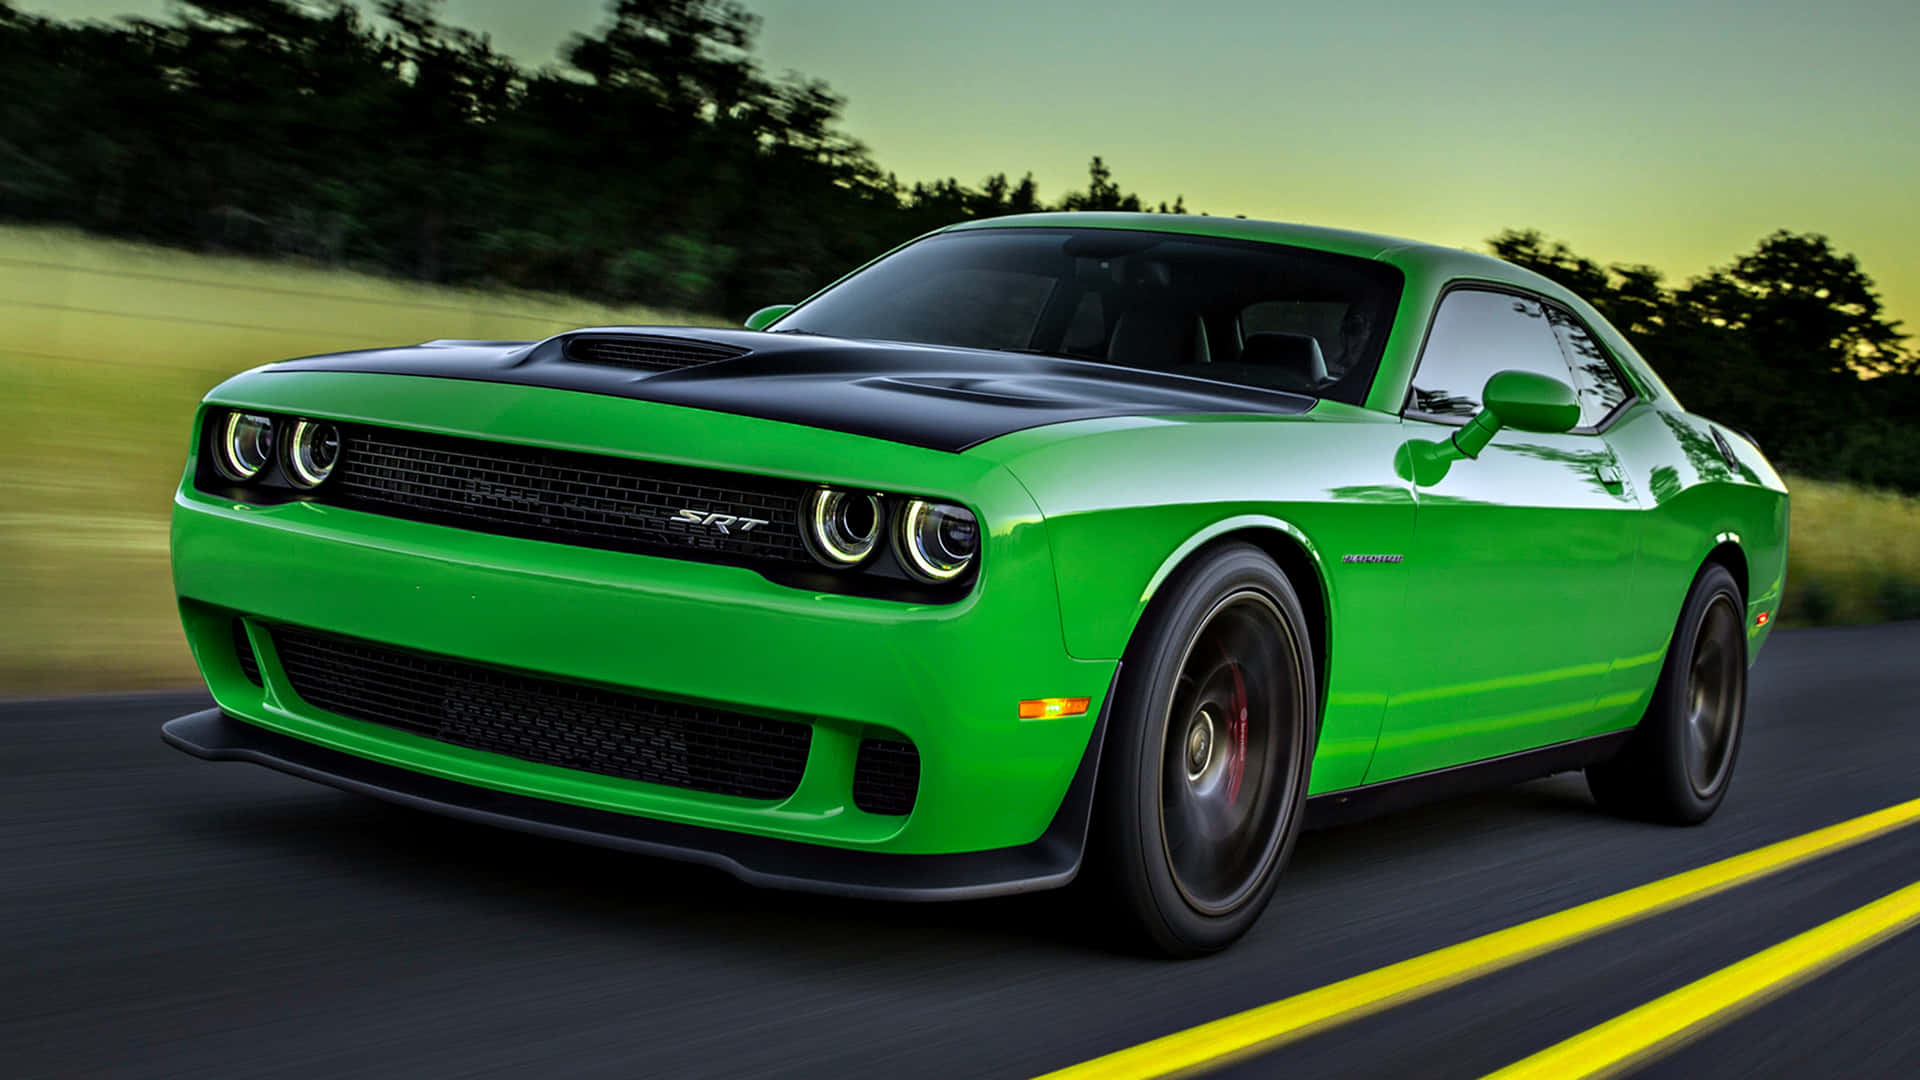 The Green Dodge Challenger Is Driving Down The Road Wallpaper